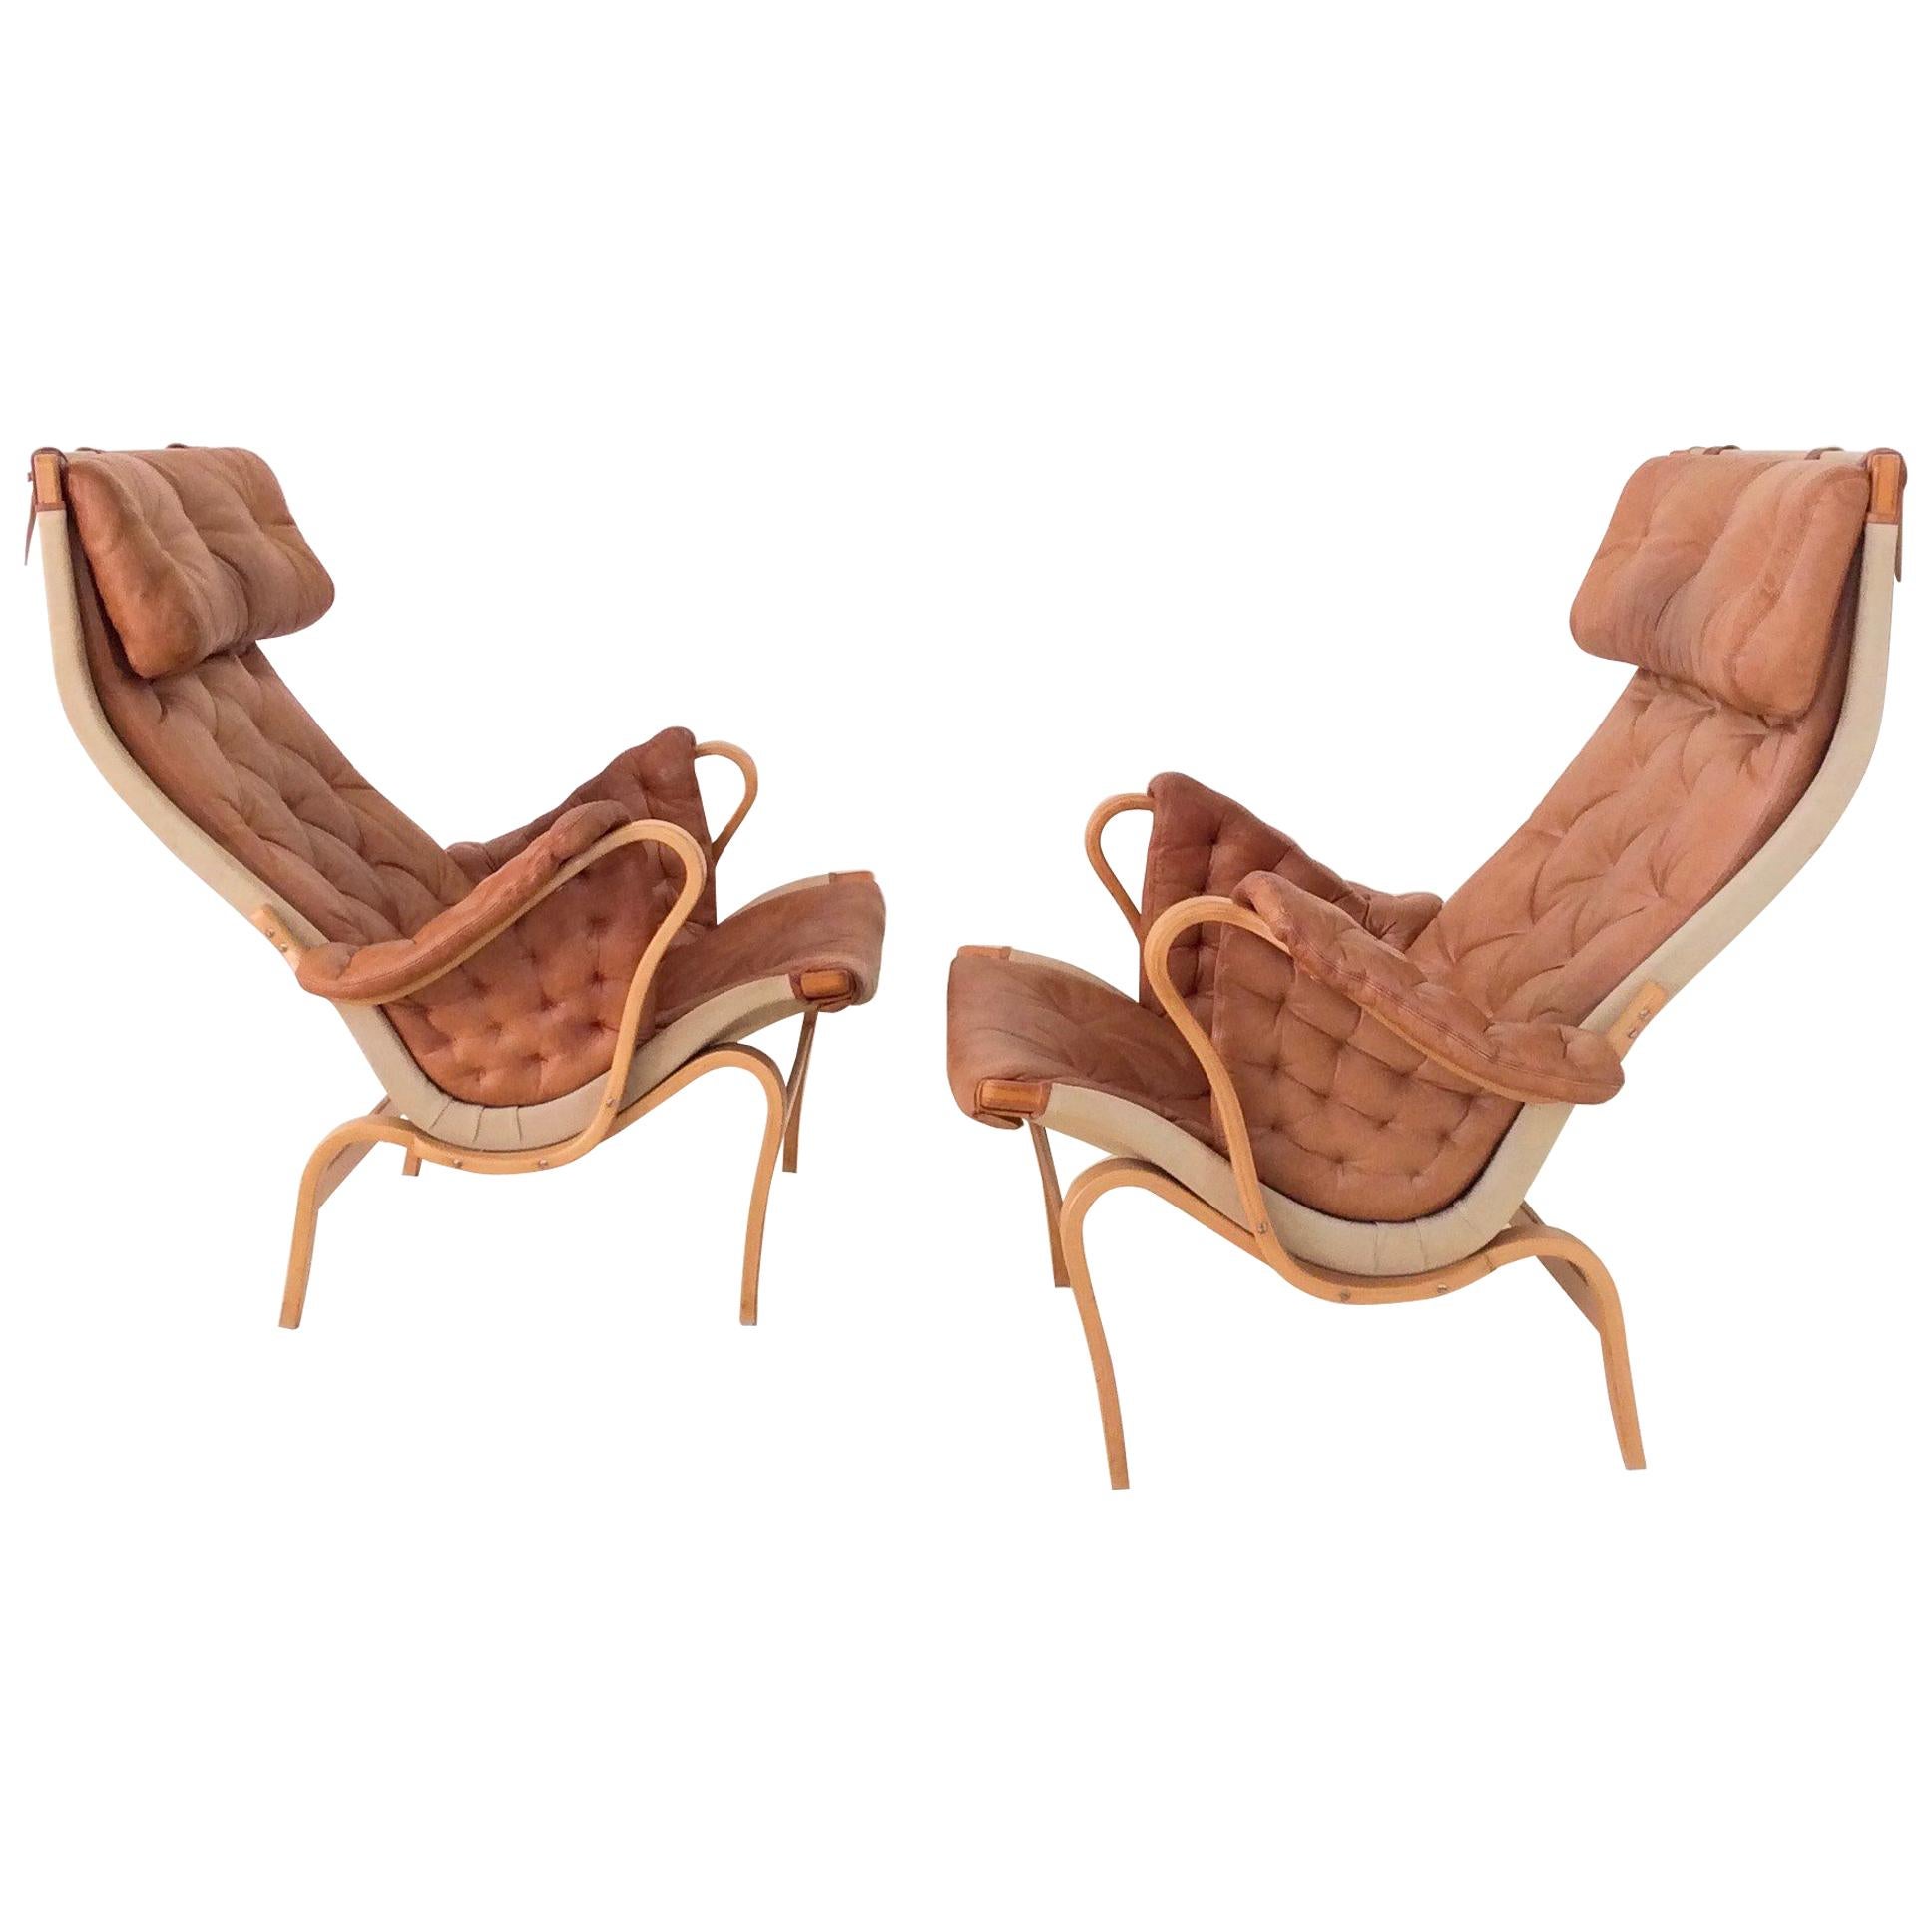 Pair of Cognac Leather Pernilla Armchairs by Bruno Mathsson, Sweden, circa 1970